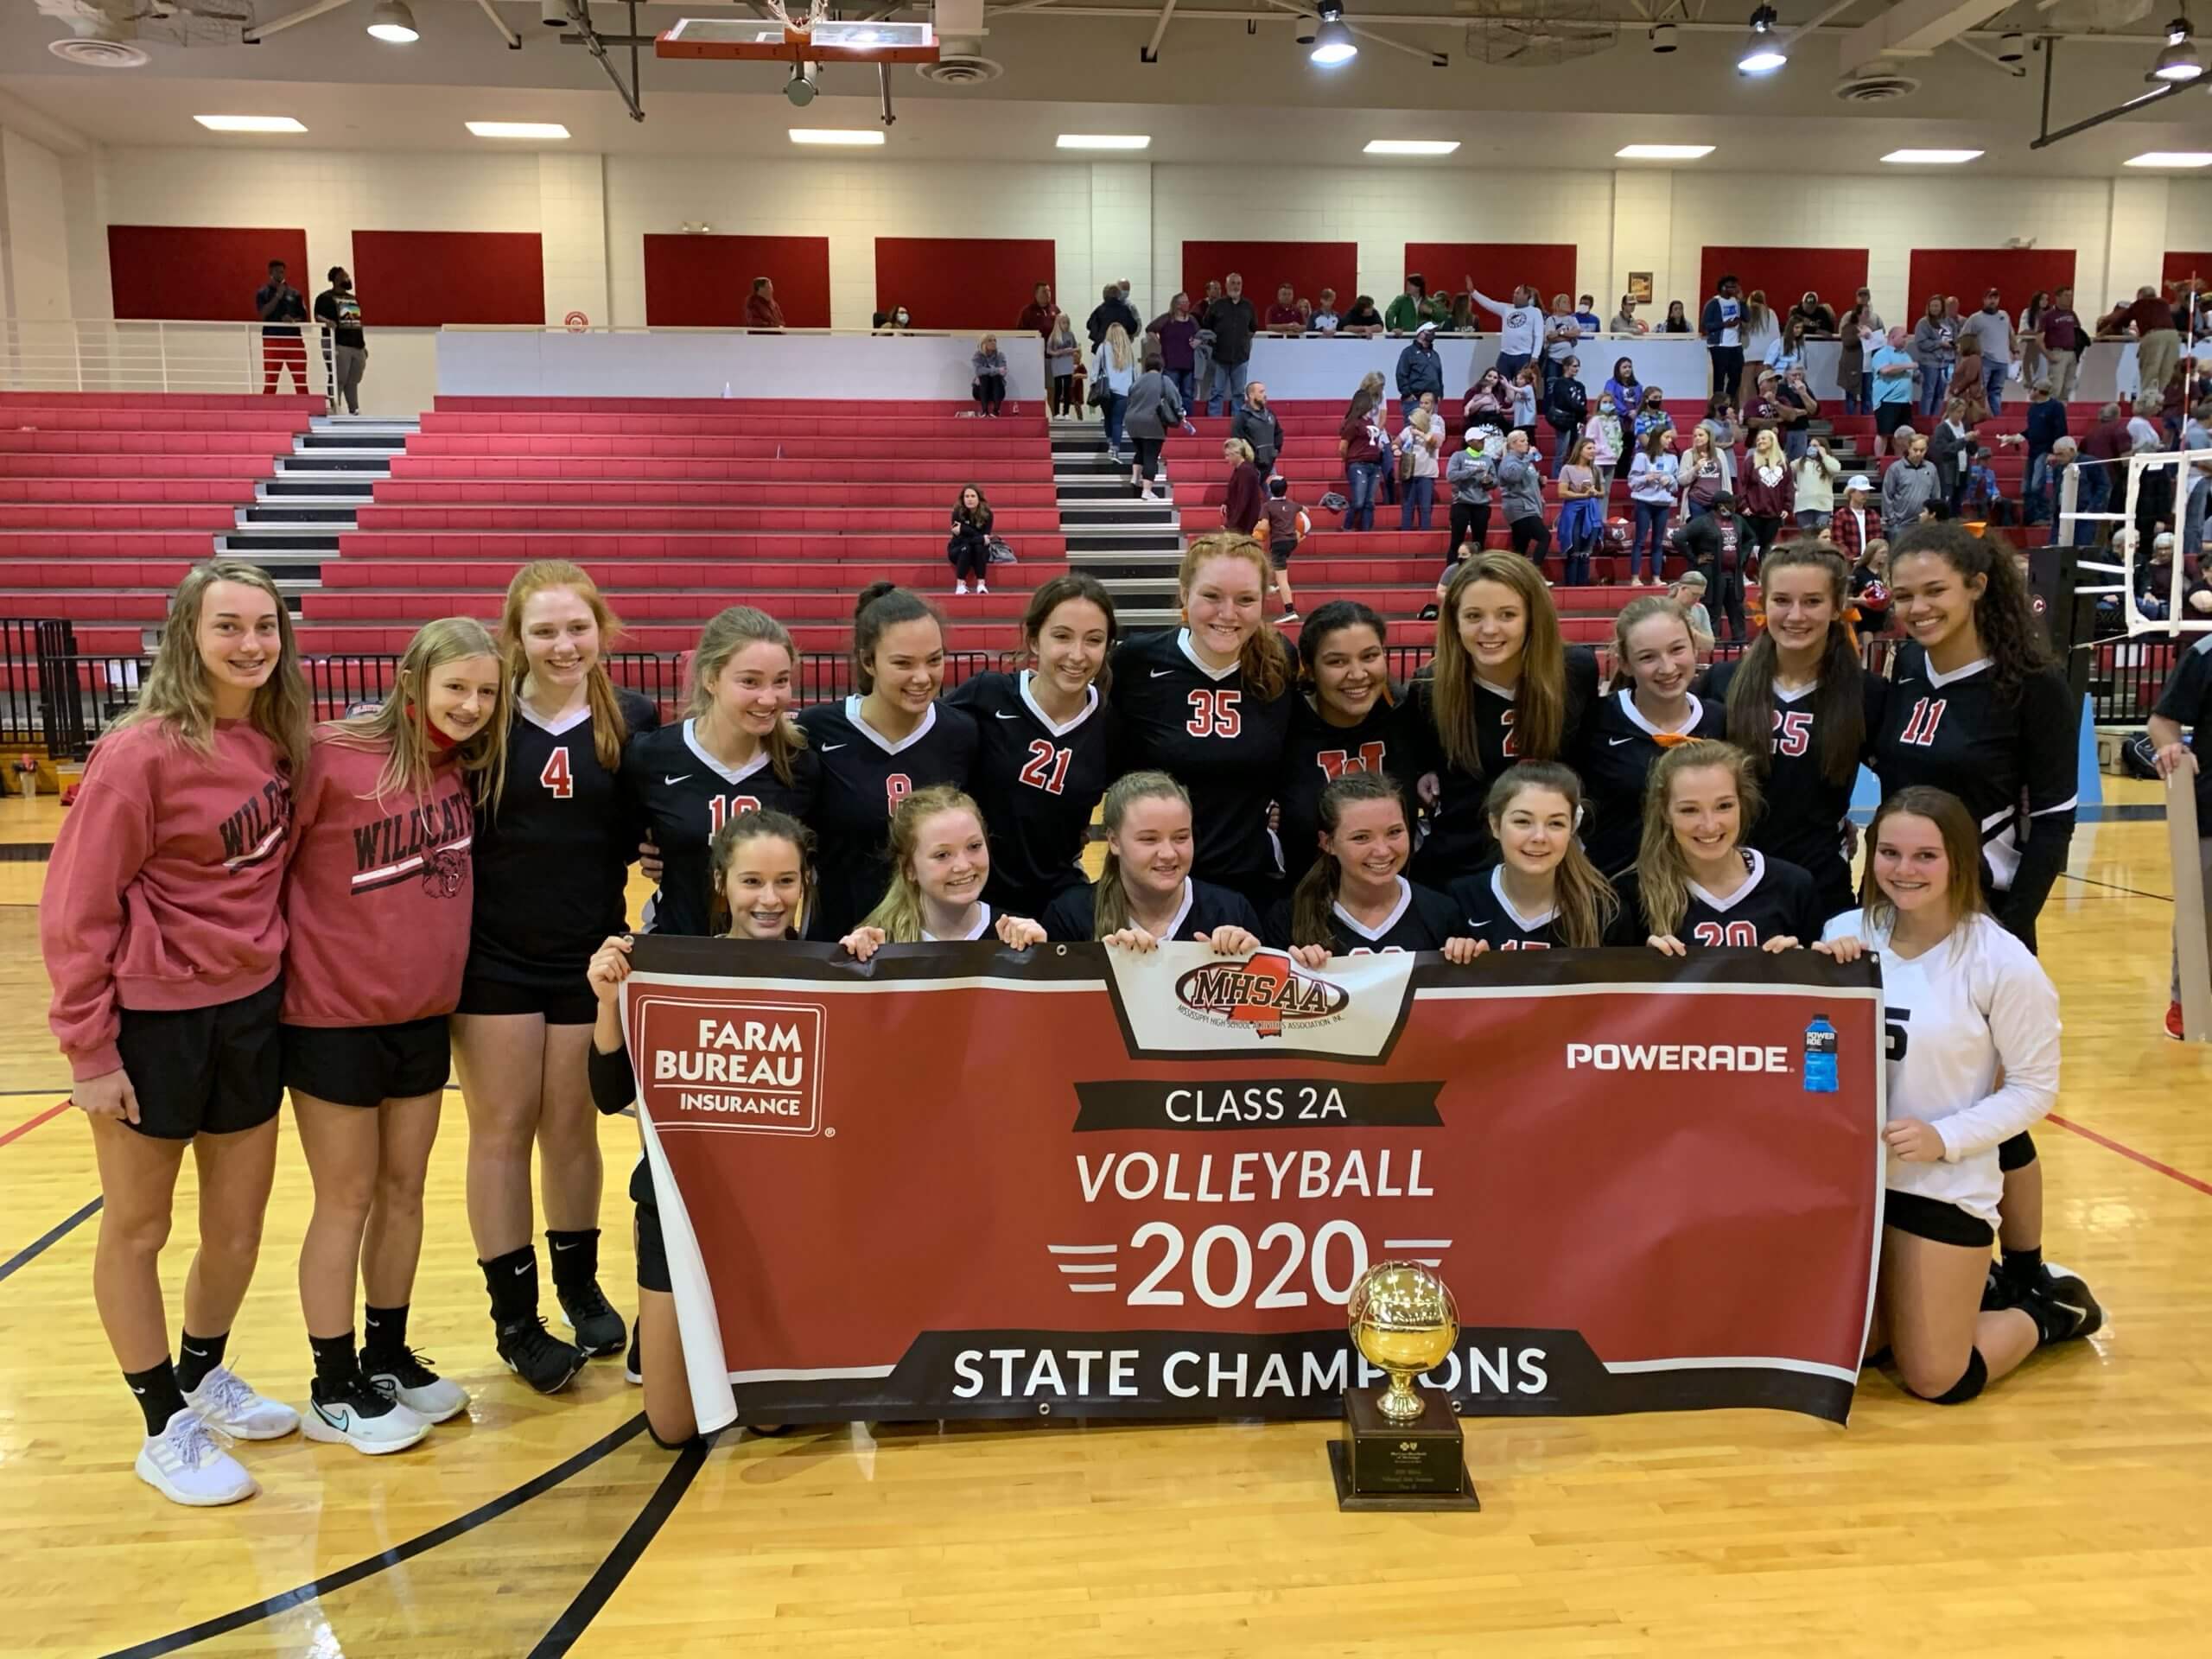 Walnut wins 5-set thriller to claim 2A volleyball state title